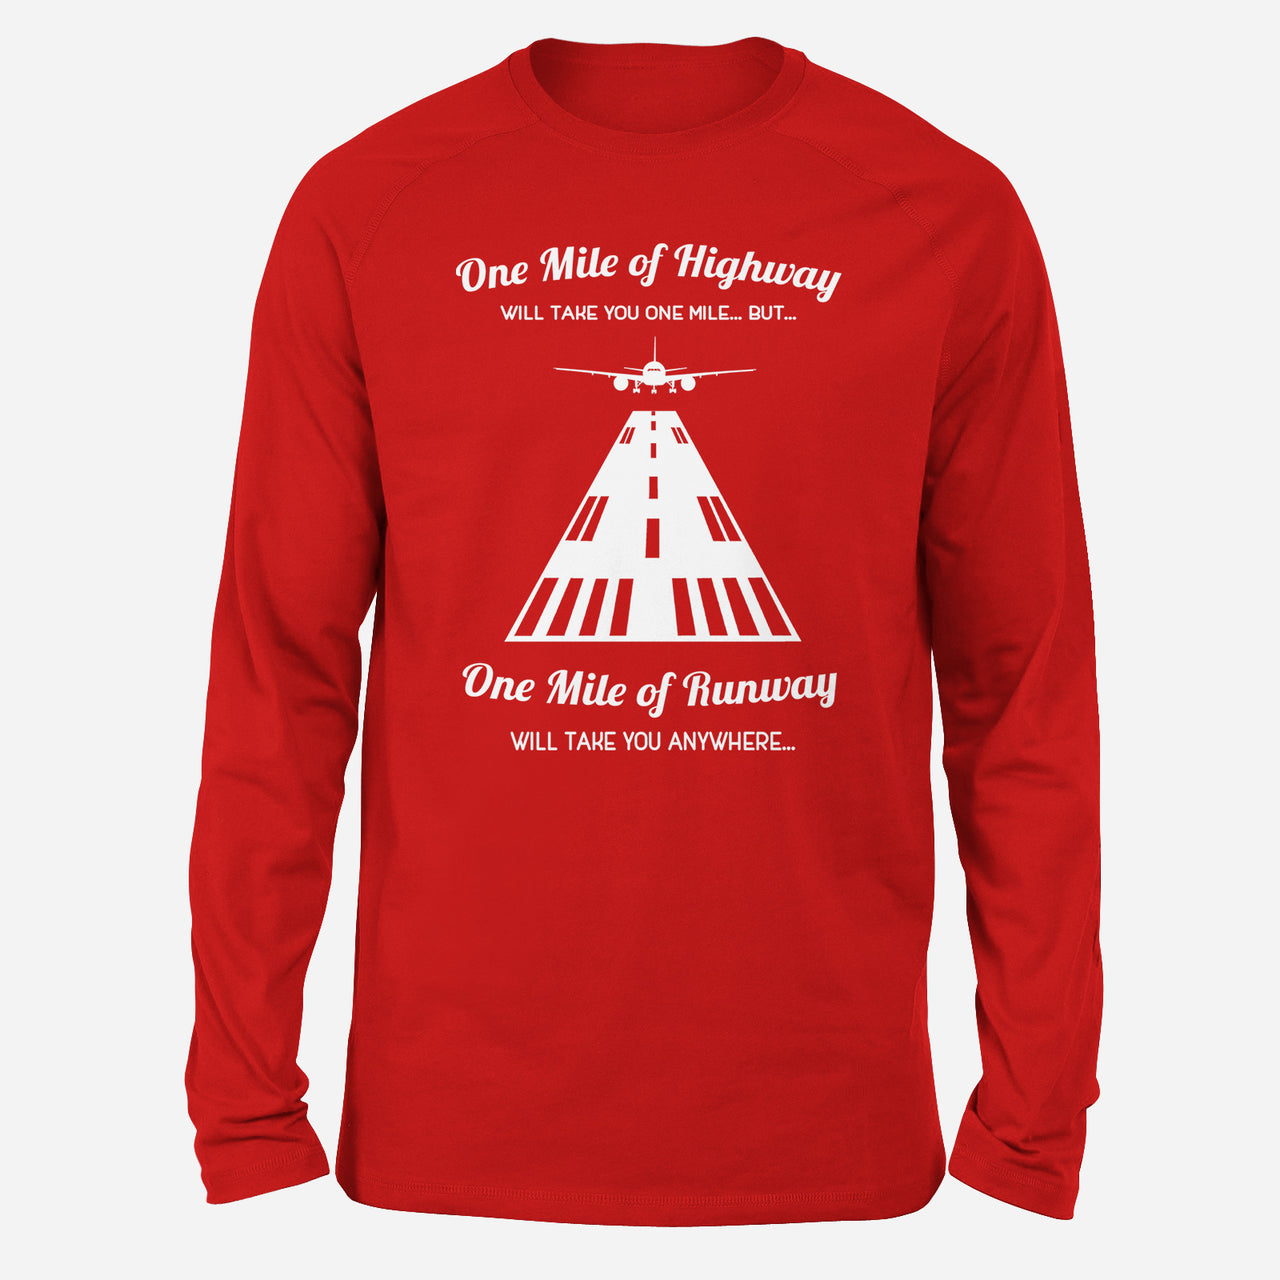 One Mile of Runway Will Take you Anywhere Designed Long-Sleeve T-Shirts